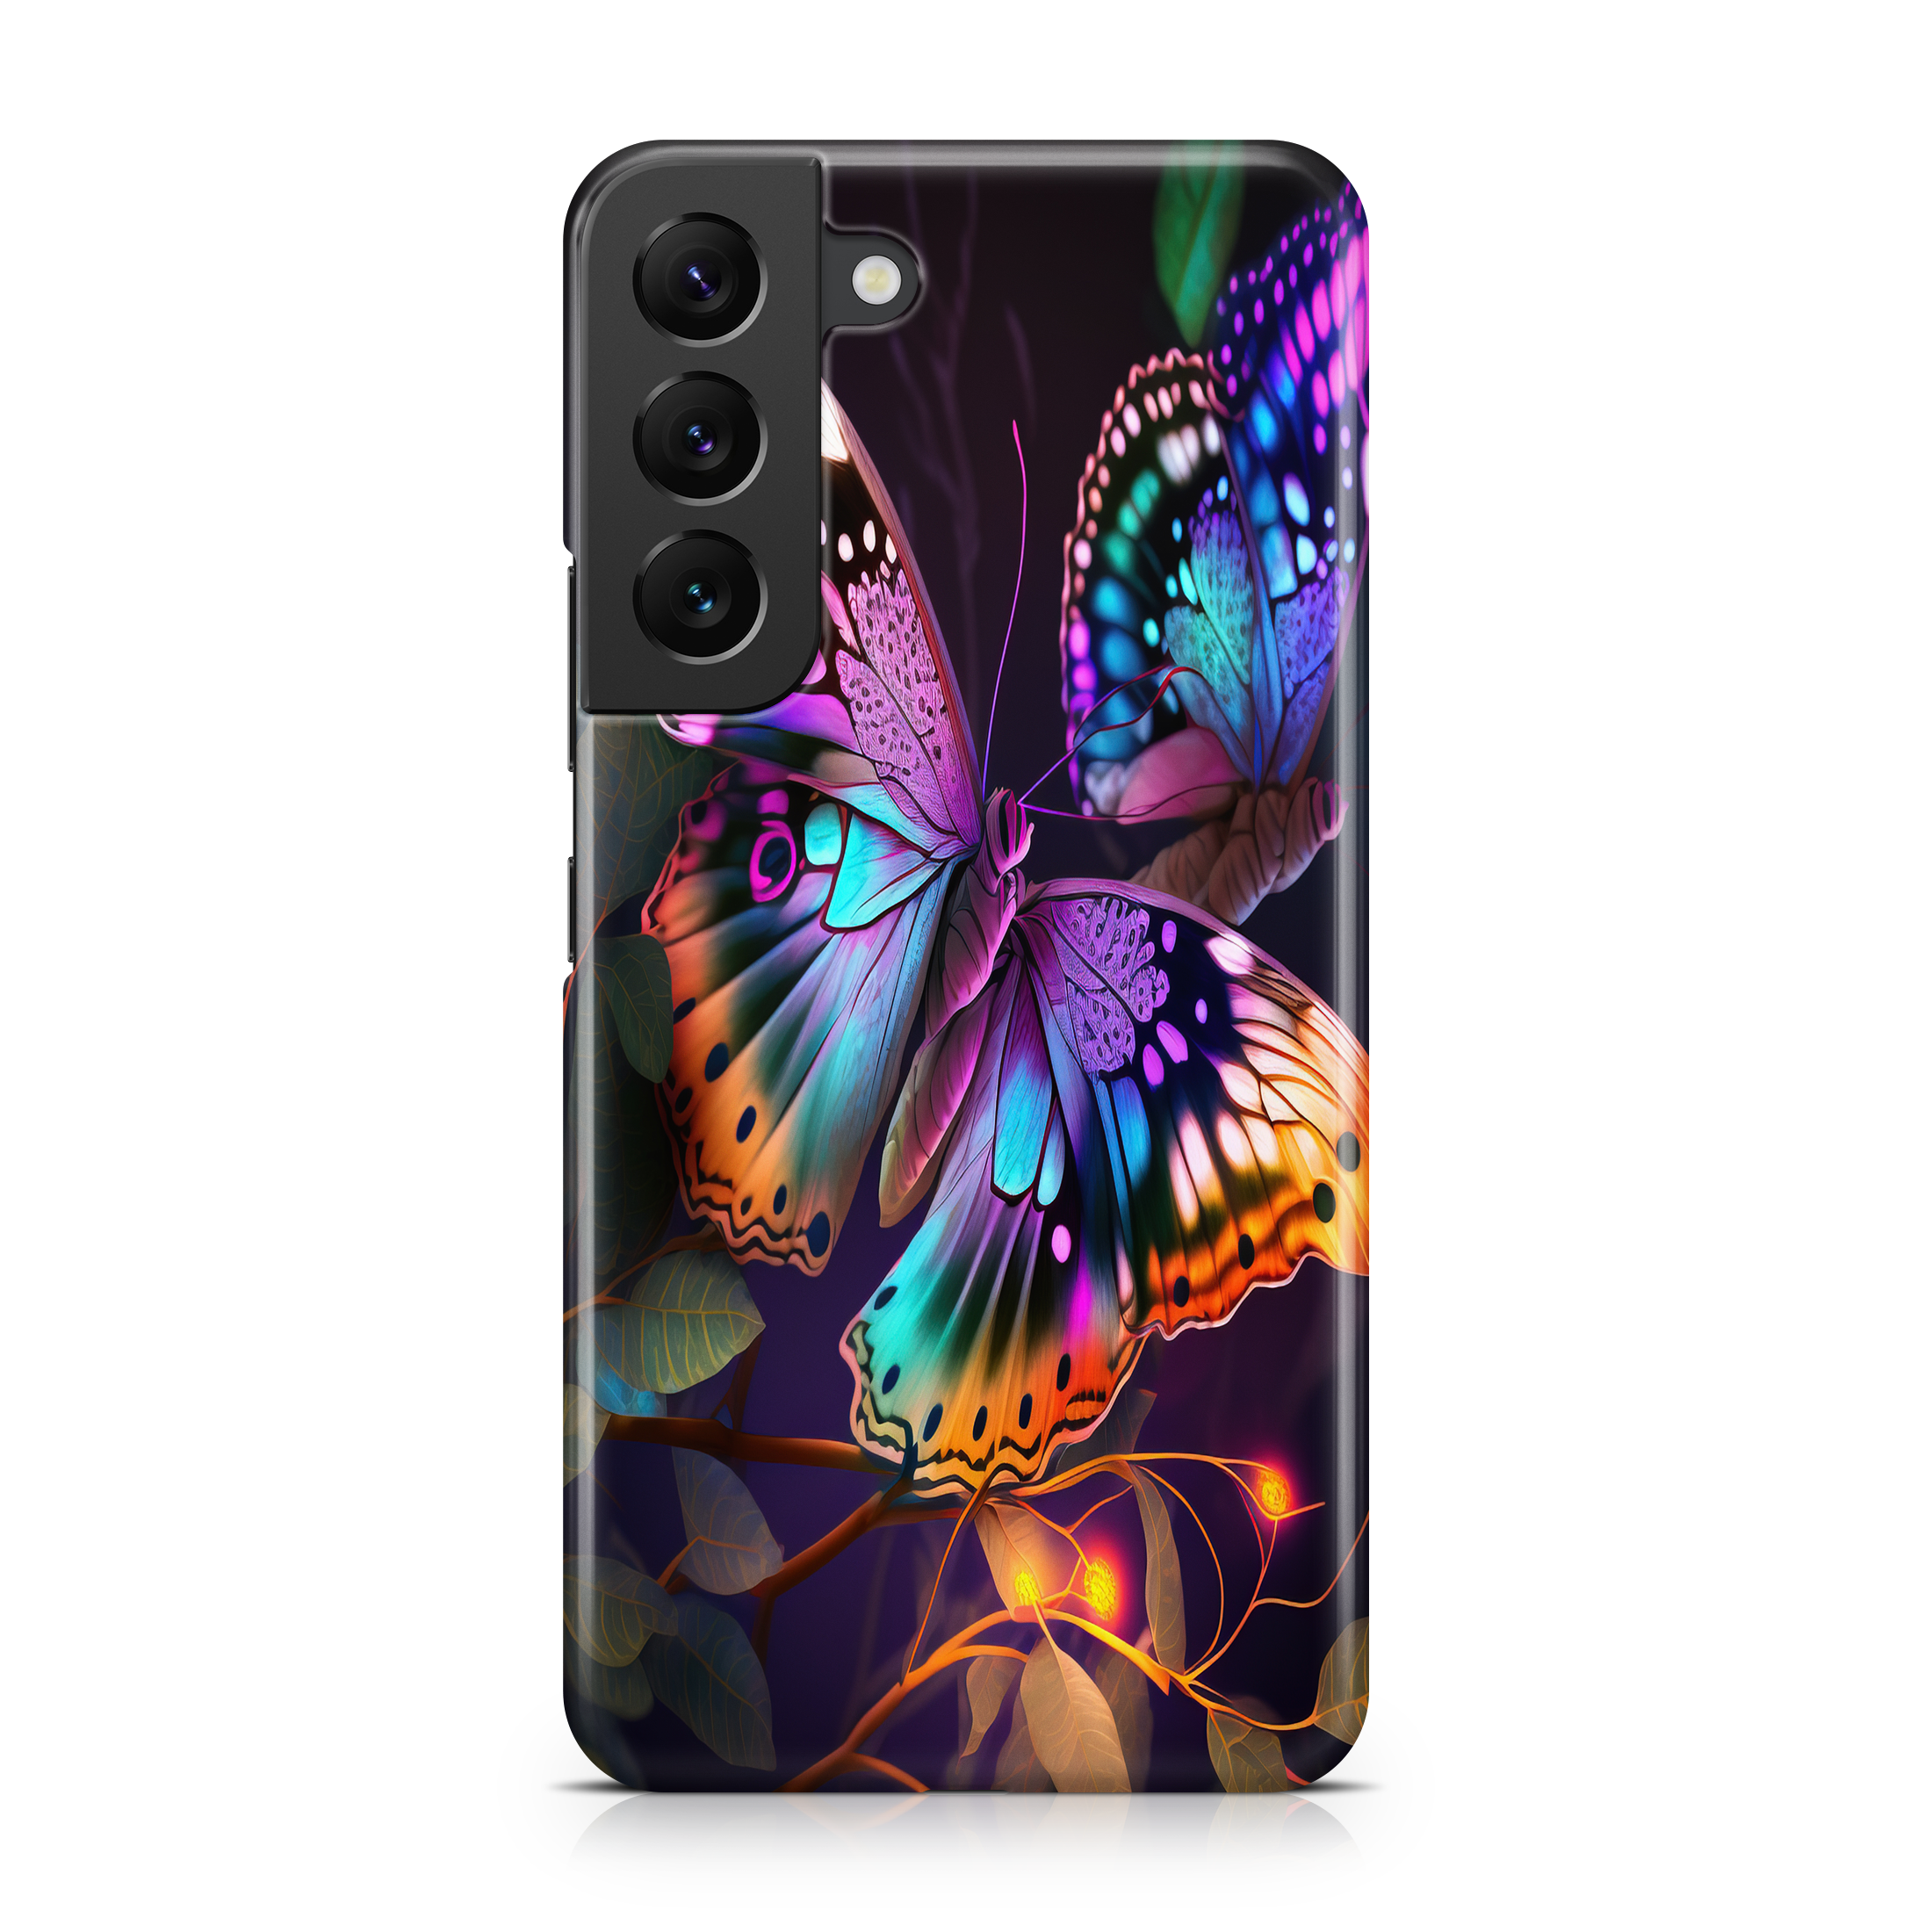 Atomic Butterflies - Samsung phone case designs by CaseSwagger